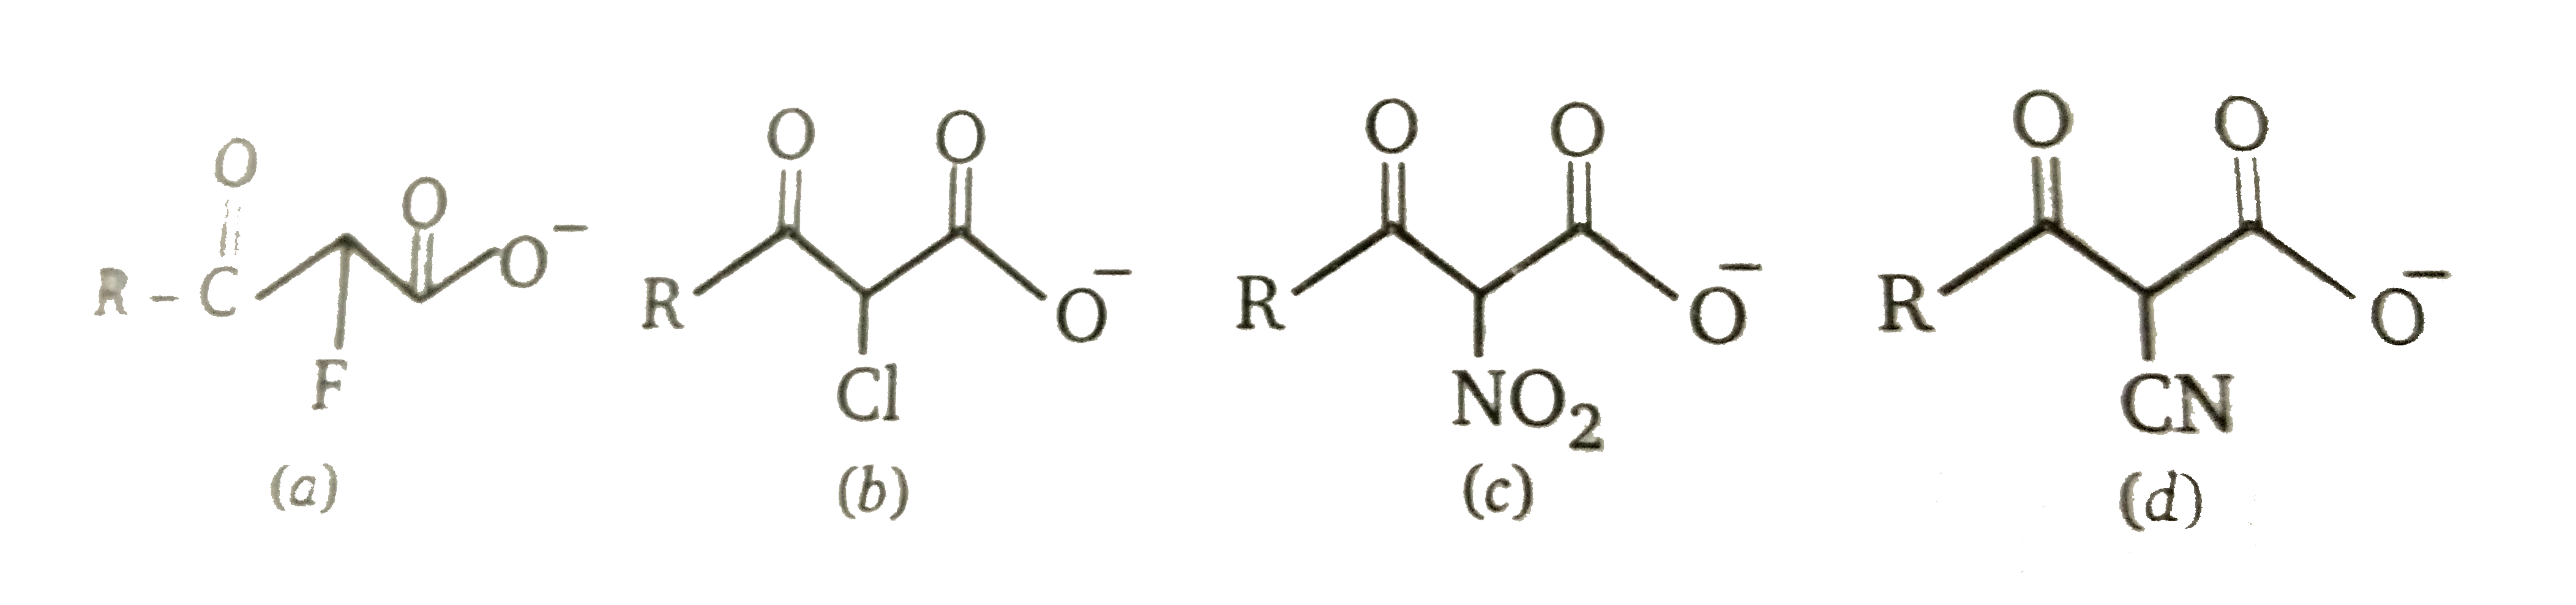 Which of the following is the correct order of decarboxylation of beta-keto carboxylate anion?